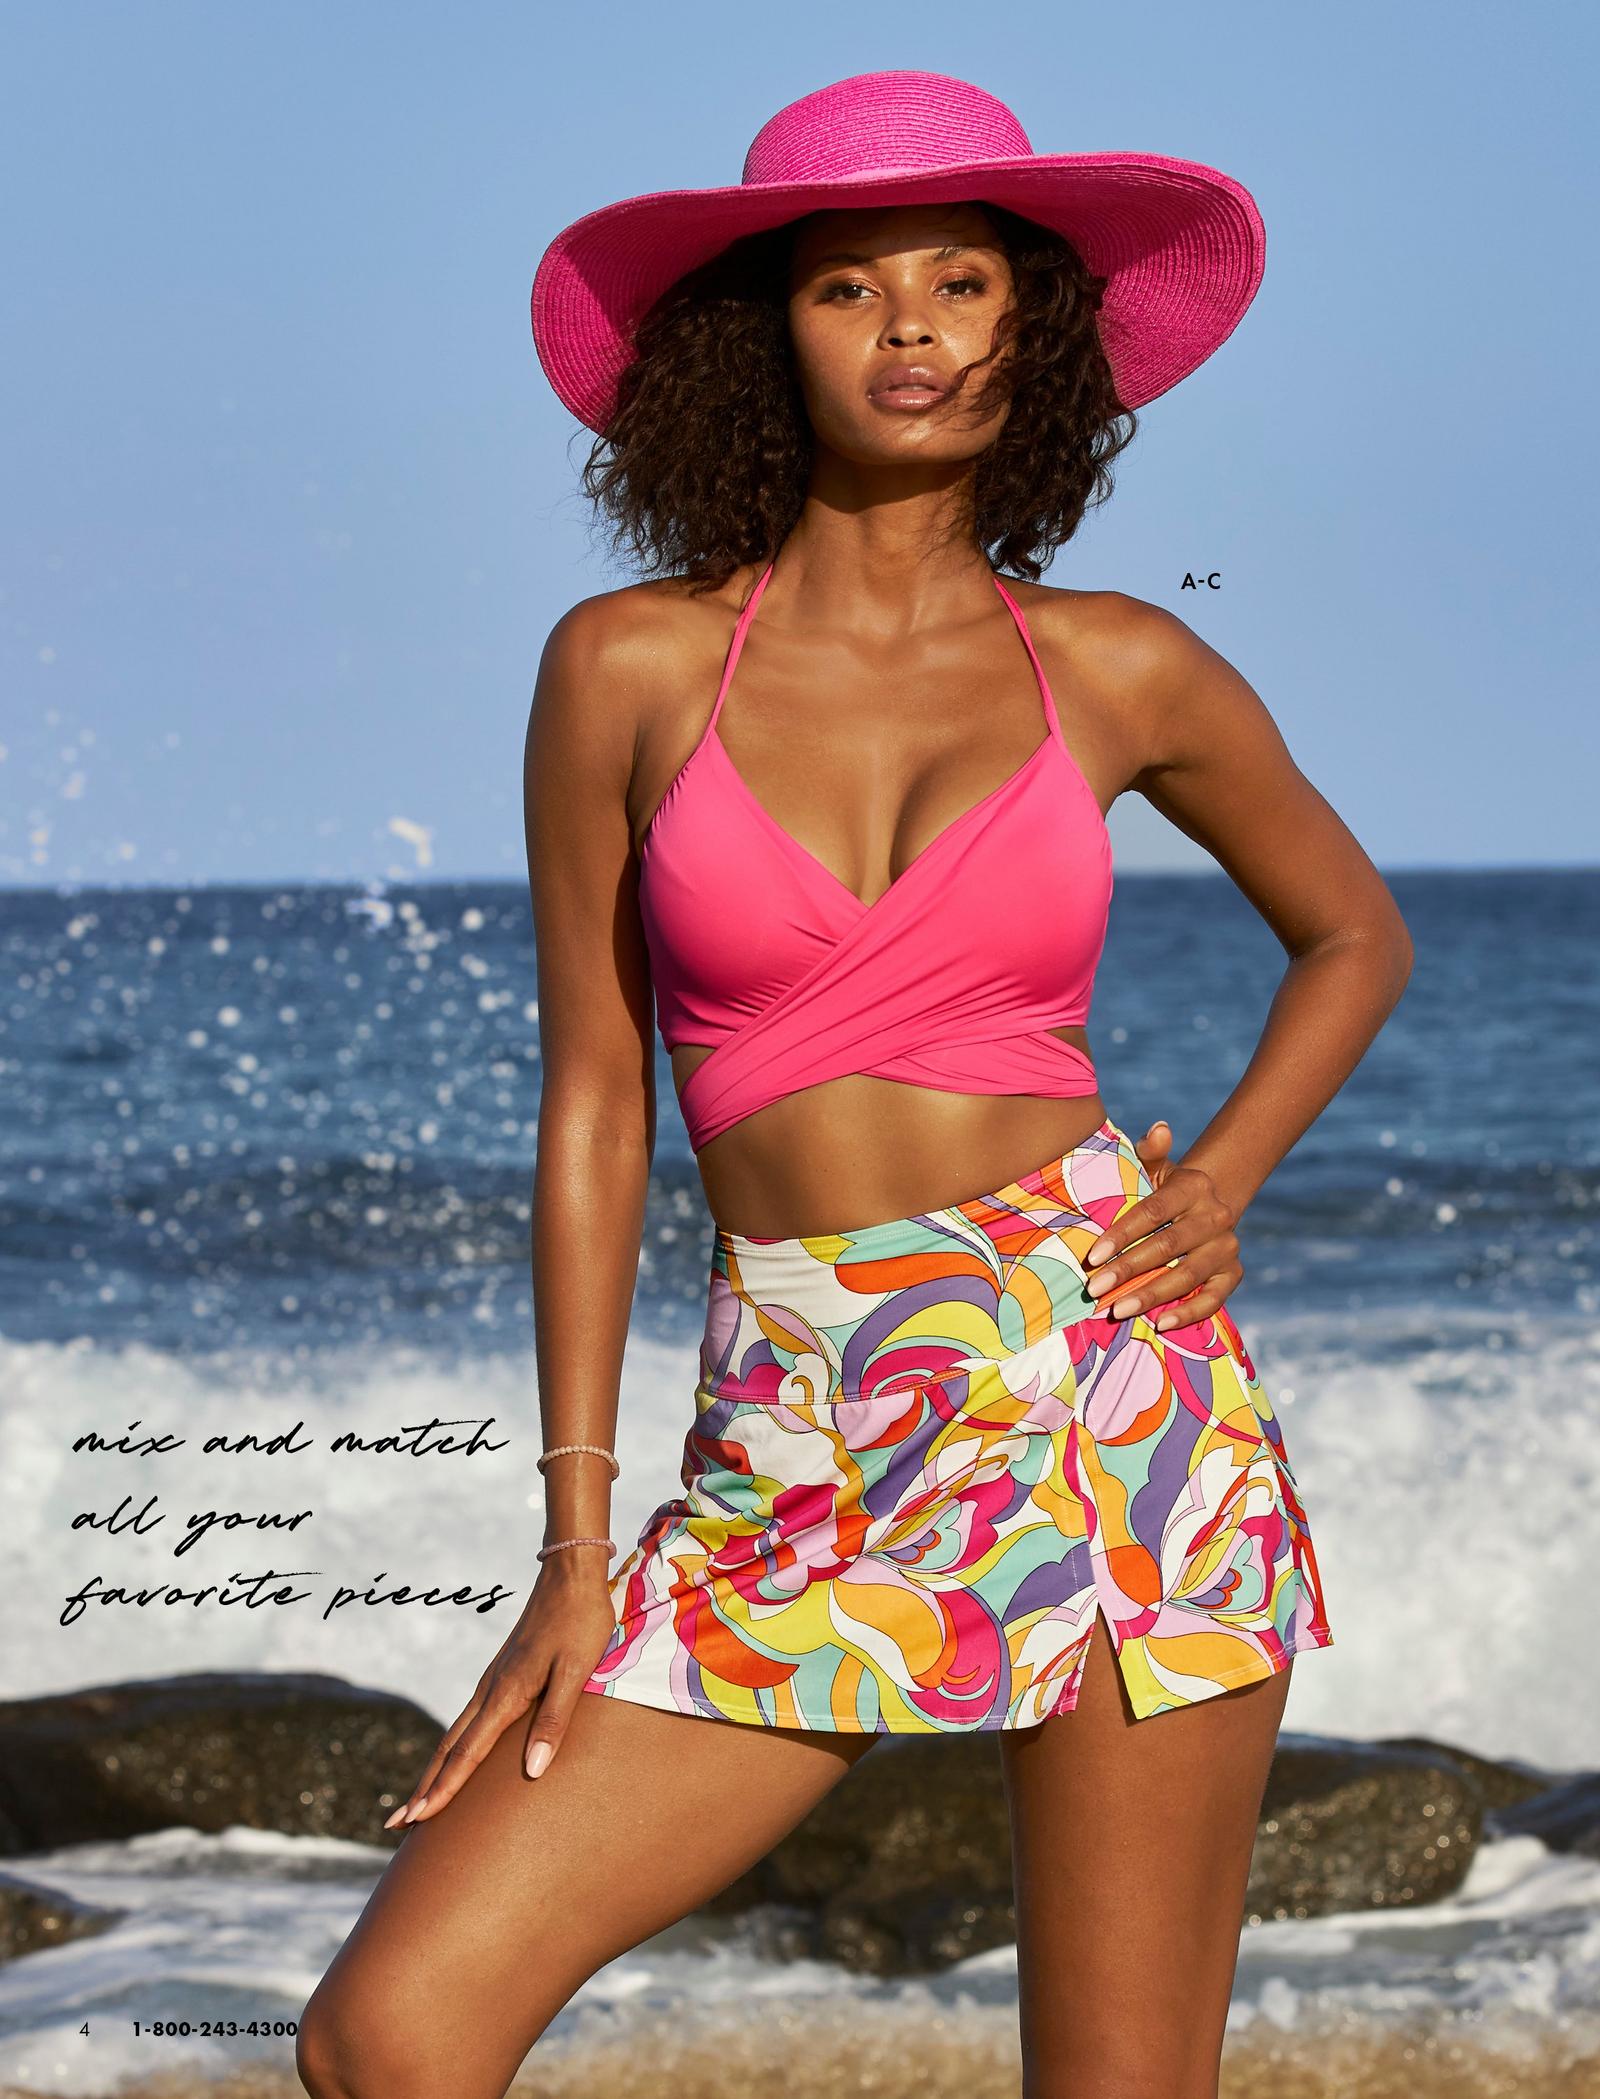 model wearing a pink bikini top, paisley print multicolored skirted bottoms, and pink wide brim hat.